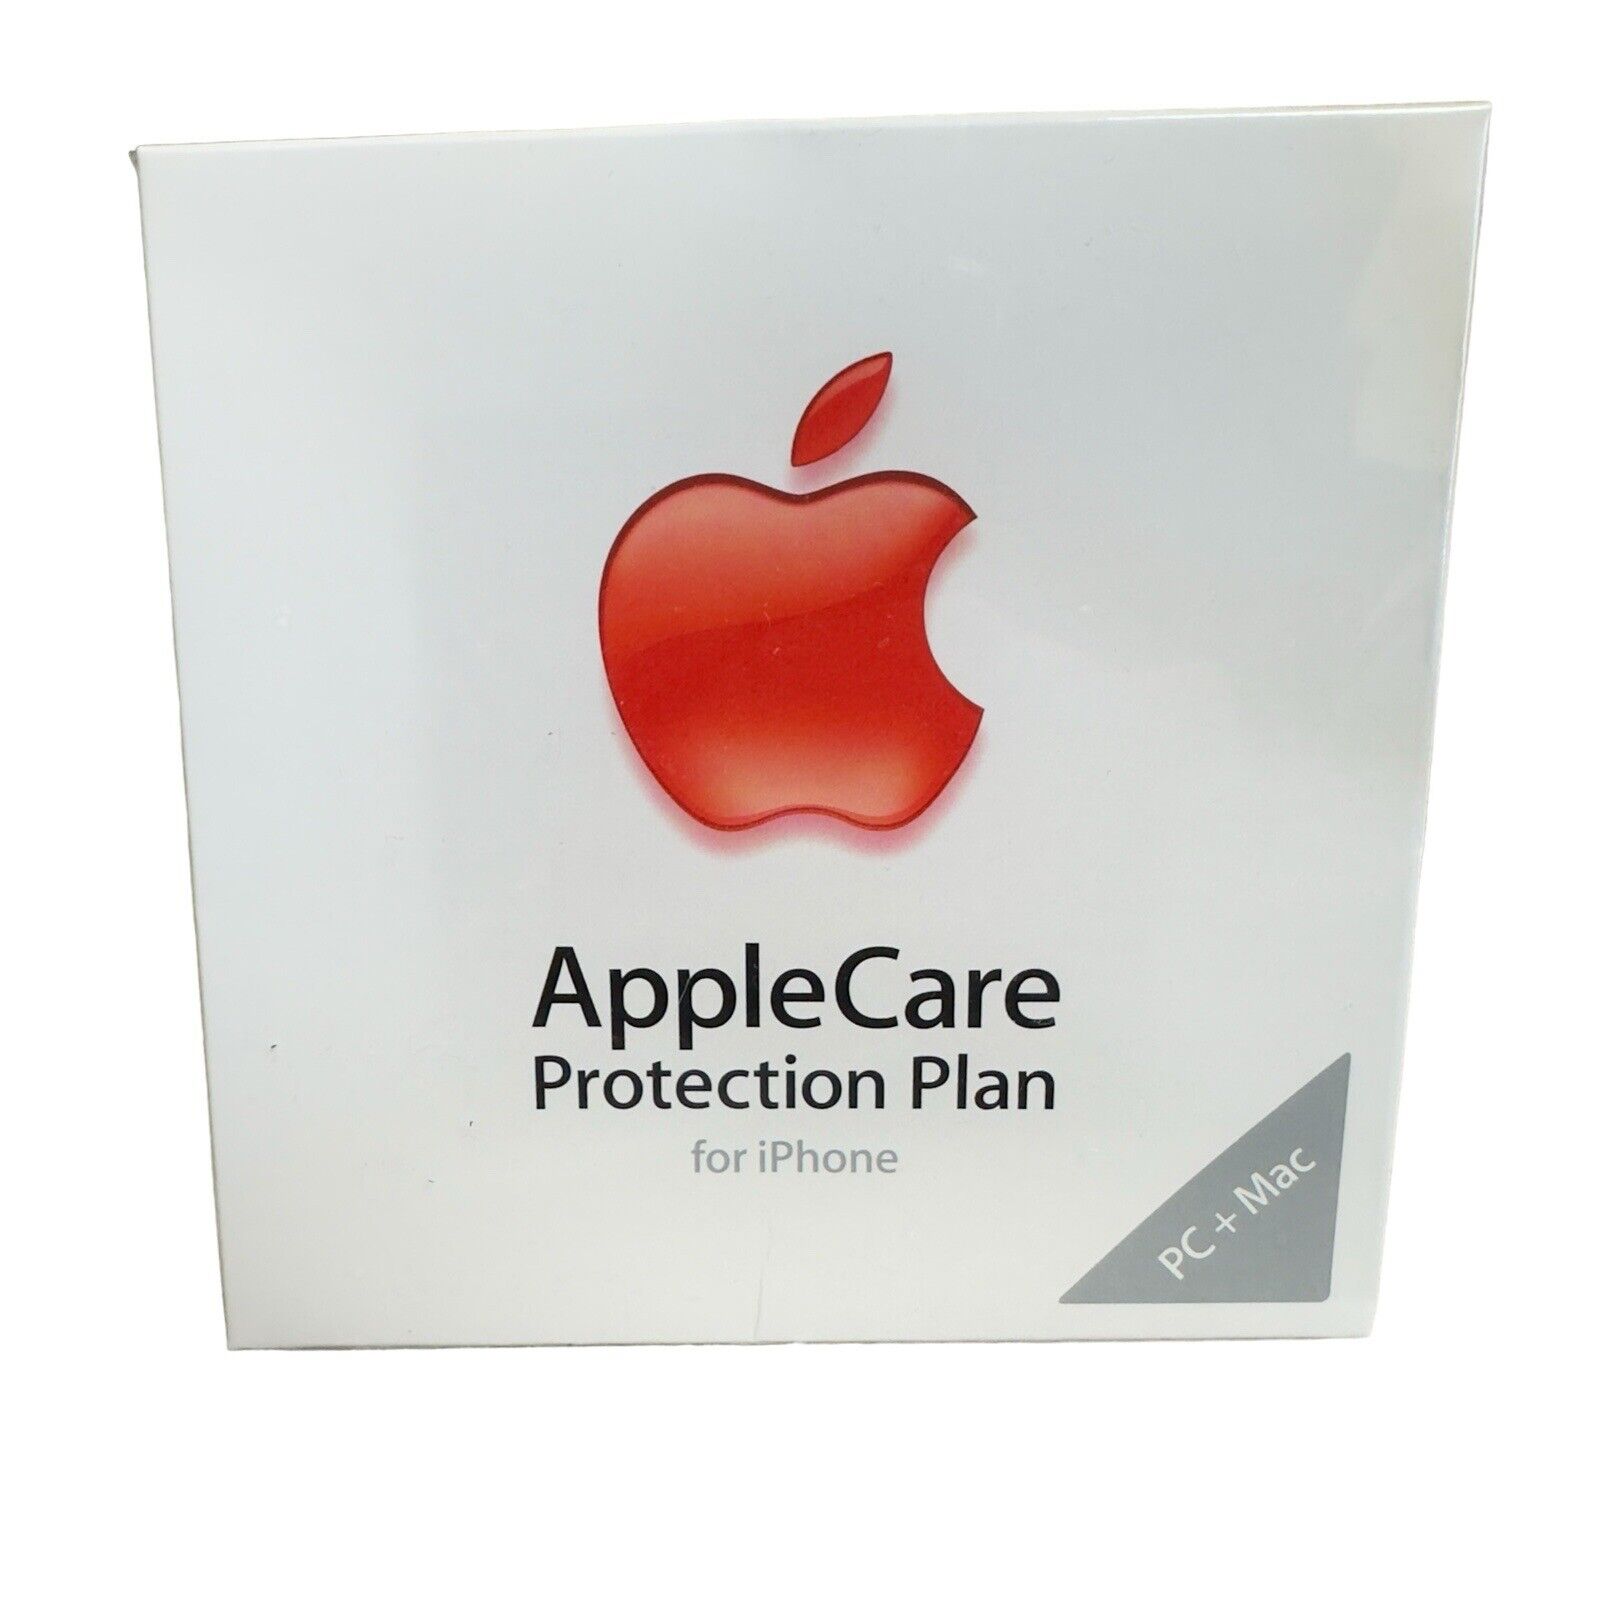 AppleCare Protection Plan for iPhone PC + Mac  Brand New Factory Sealed